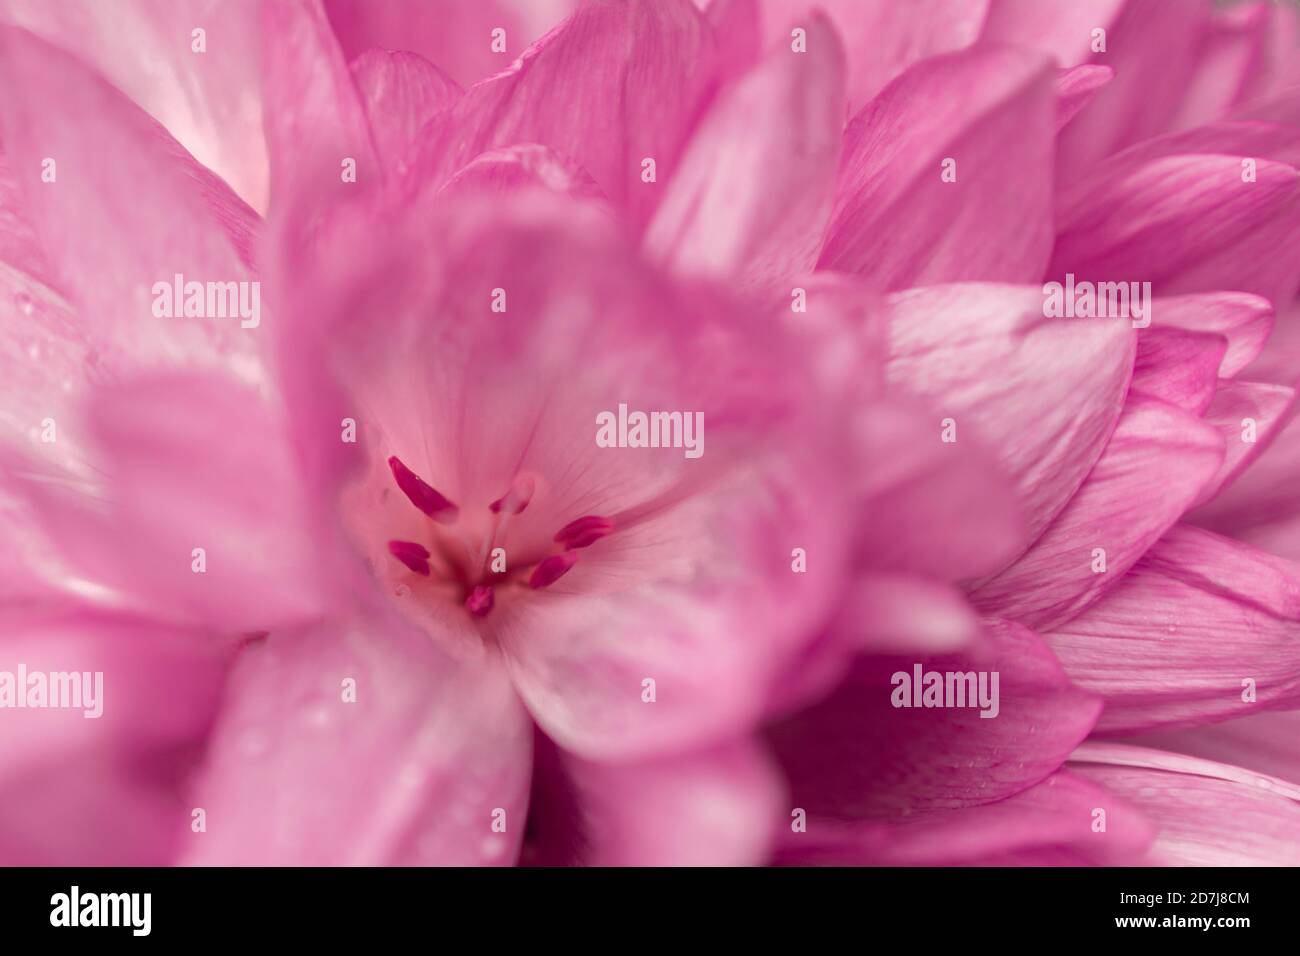 Beautiful fresh flowers tulips with water drops. Abstract floral blossom art background. Extreme closeup, macro image. Stock Photo